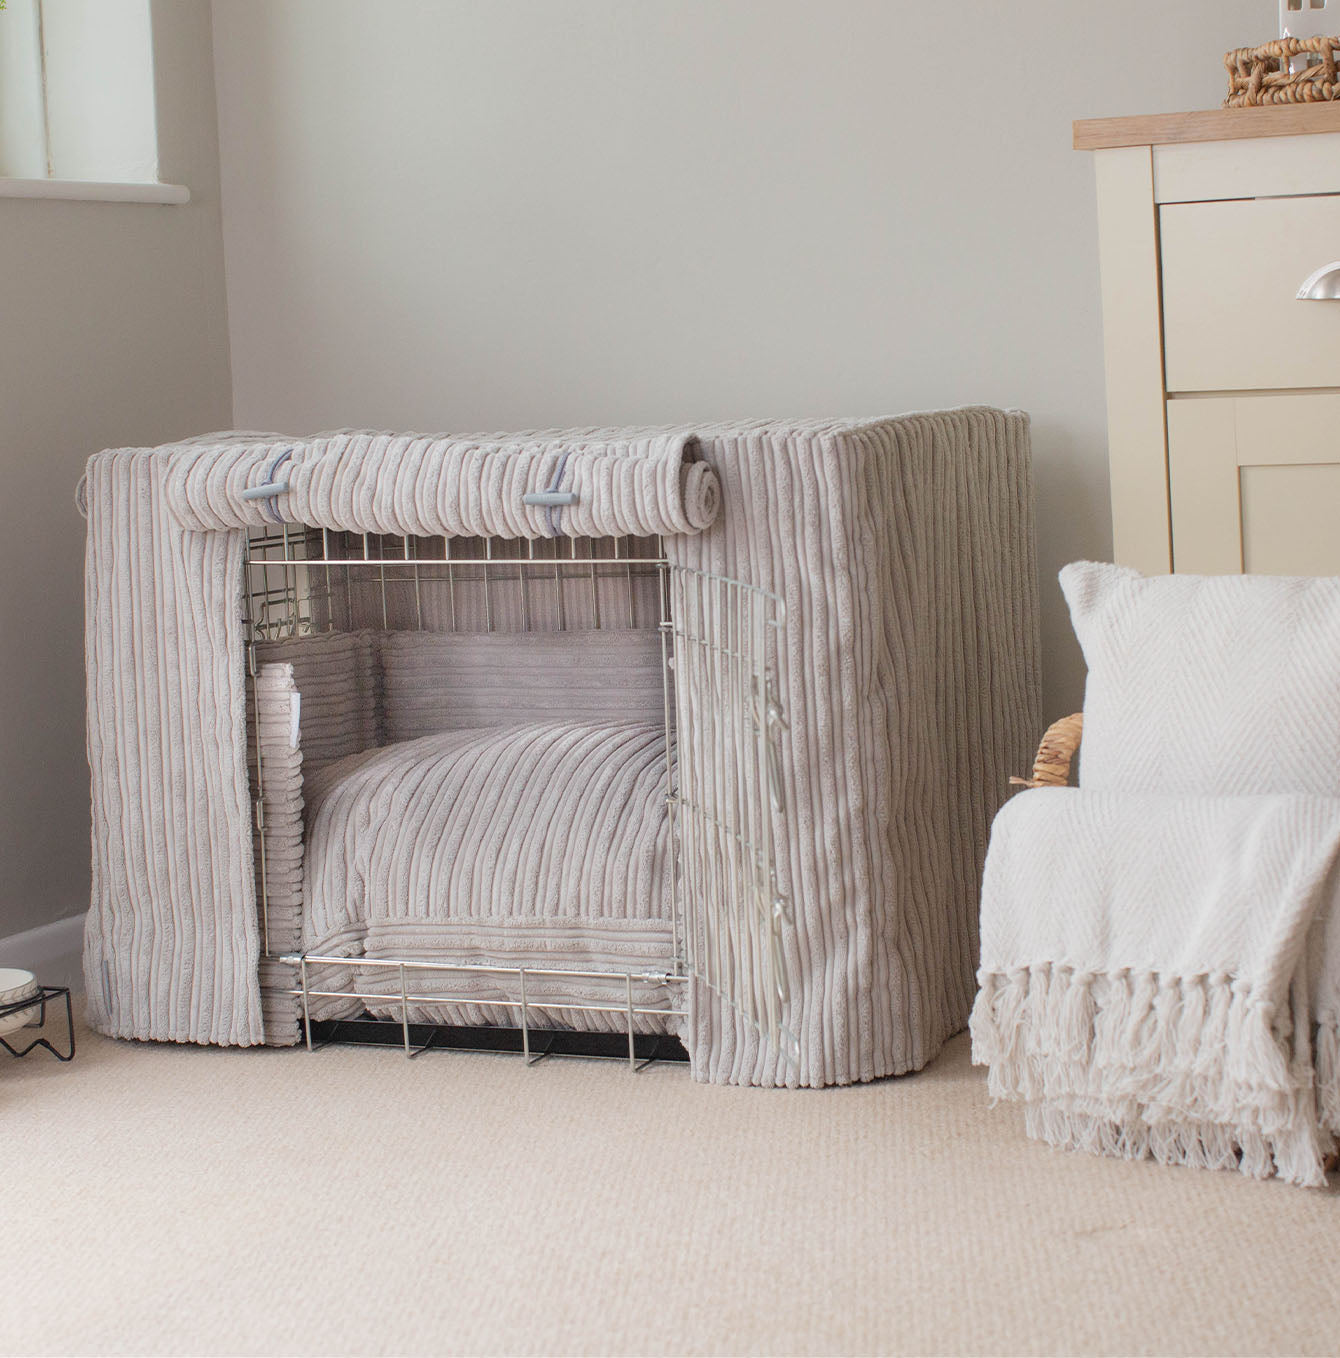 Luxury Dog Crate Set, Essentials Complete Plush Crate Set In Light Grey! Build The Ultimate Dog Den For The Perfect Burrow! Dog Crate Cover Available To Personalise at Lords & Labradors